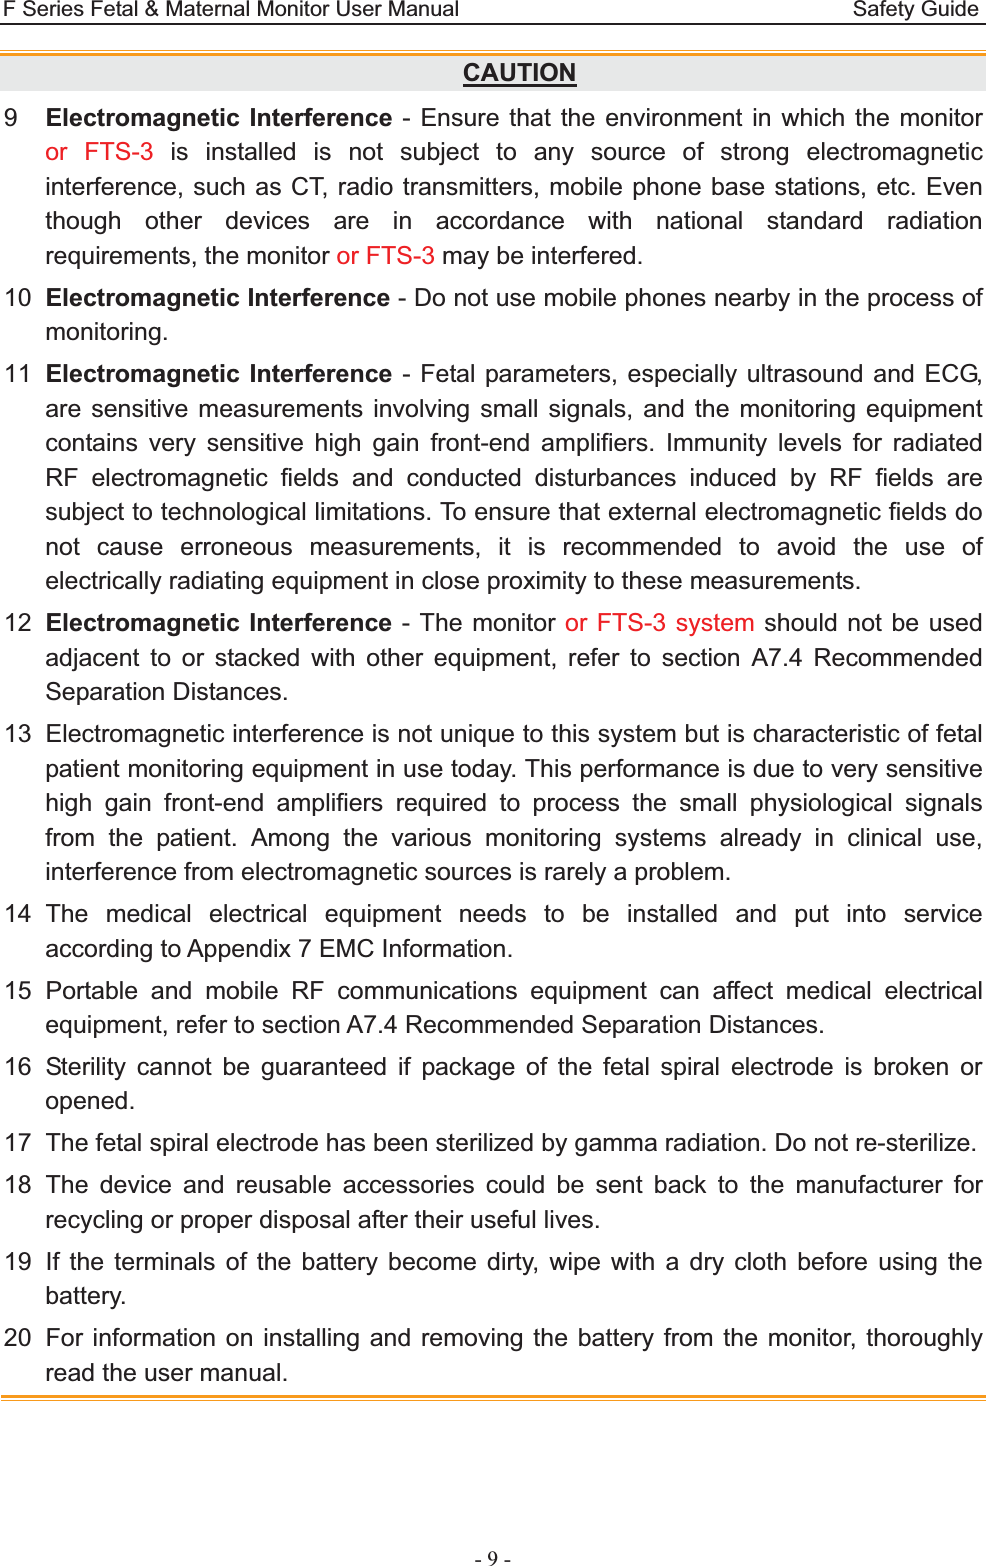 F Series Fetal &amp; Maternal Monitor User Manual                                    Safety Guide - 9 - CAUTION9  Electromagnetic Interference - Ensure that the environment in which the monitor or FTS-3 is installed is not subject to any source of strong electromagnetic interference, such as CT, radio transmitters, mobile phone base stations, etc. Even though other devices are in accordance with national standard radiation requirements, the monitor or FTS-3 may be interfered. 10  Electromagnetic Interference - Do not use mobile phones nearby in the process of monitoring. 11  Electromagnetic Interference - Fetal parameters, especially ultrasound and ECG, are sensitive measurements involving small signals, and the monitoring equipment contains very sensitive high gain front-end amplifiers. Immunity levels for radiated RF electromagnetic fields and conducted disturbances induced by RF fields are subject to technological limitations. To ensure that external electromagnetic fields do not cause erroneous measurements, it is recommended to avoid the use of electrically radiating equipment in close proximity to these measurements. 12  Electromagnetic Interference - The monitor or FTS-3 system should not be used adjacent to or stacked with other equipment, refer to section A7.4 Recommended Separation Distances. 13  Electromagnetic interference is not unique to this system but is characteristic of fetal patient monitoring equipment in use today. This performance is due to very sensitive high gain front-end amplifiers required to process the small physiological signals from the patient. Among the various monitoring systems already in clinical use, interference from electromagnetic sources is rarely a problem. 14 The medical electrical equipment needs to be installed and put into service according to Appendix 7 EMC Information. 15 Portable and mobile RF communications equipment can affect medical electrical equipment, refer to section A7.4 Recommended Separation Distances. 16 Sterility cannot be guaranteed if package of the fetal spiral electrode is broken or opened. 17  The fetal spiral electrode has been sterilized by gamma radiation. Do not re-sterilize. 18 The device and reusable accessories could be sent back to the manufacturer for recycling or proper disposal after their useful lives. 19  If the terminals of the battery become dirty, wipe with a dry cloth before using the battery.  20  For information on installing and removing the battery from the monitor, thoroughly read the user manual.     